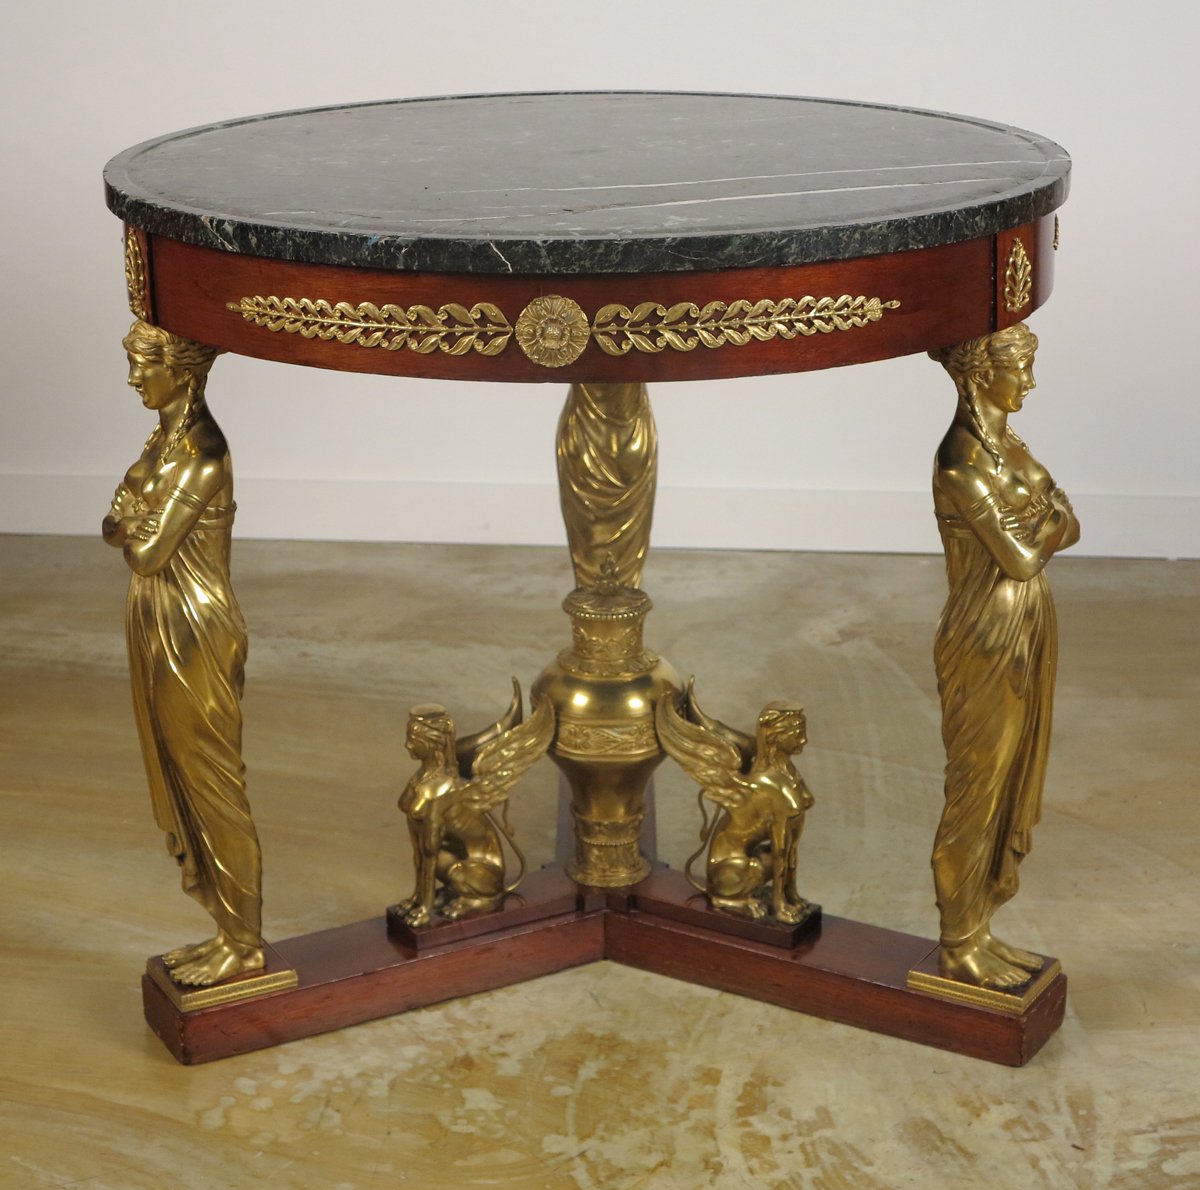 A Fine Empire Style Gilt-Bronze Mahogany Gueridon/Center Table In the manner of Jacob-Desmalter